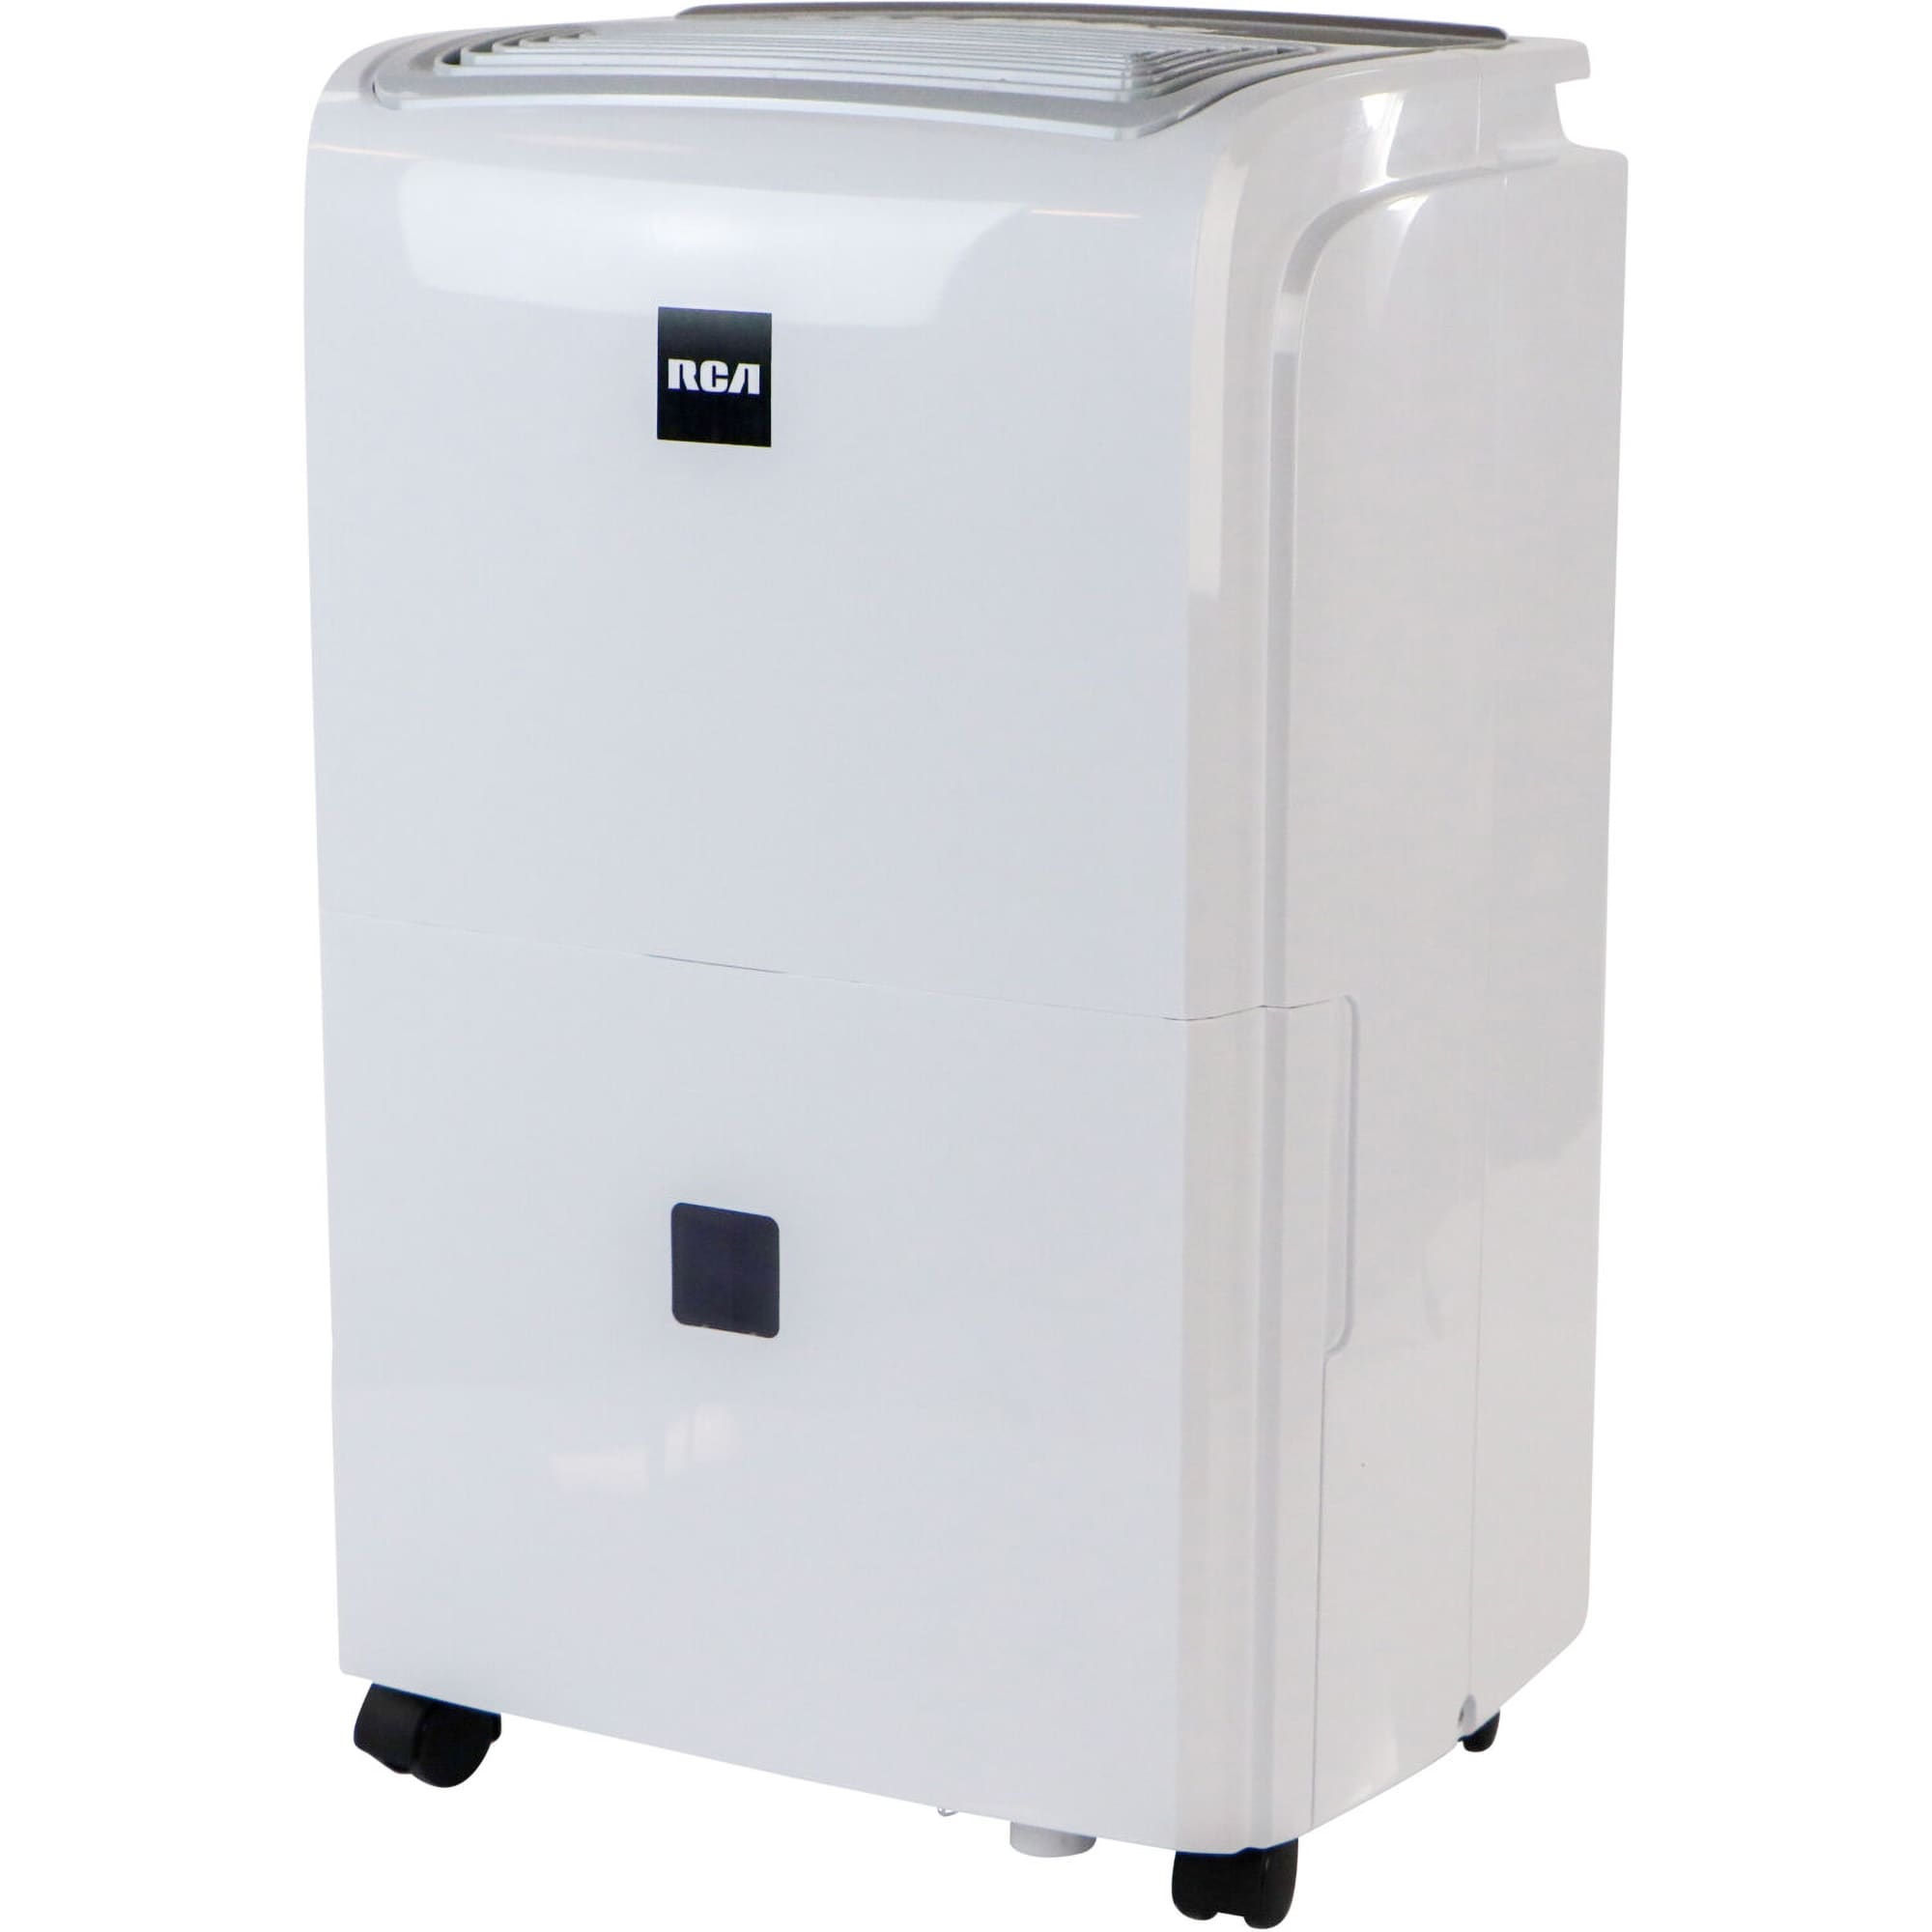 BLACK+DECKER 50-Pint 2-Speed Dehumidifier ENERGY STAR (For Rooms 3001+ sq  ft) in the Dehumidifiers department at